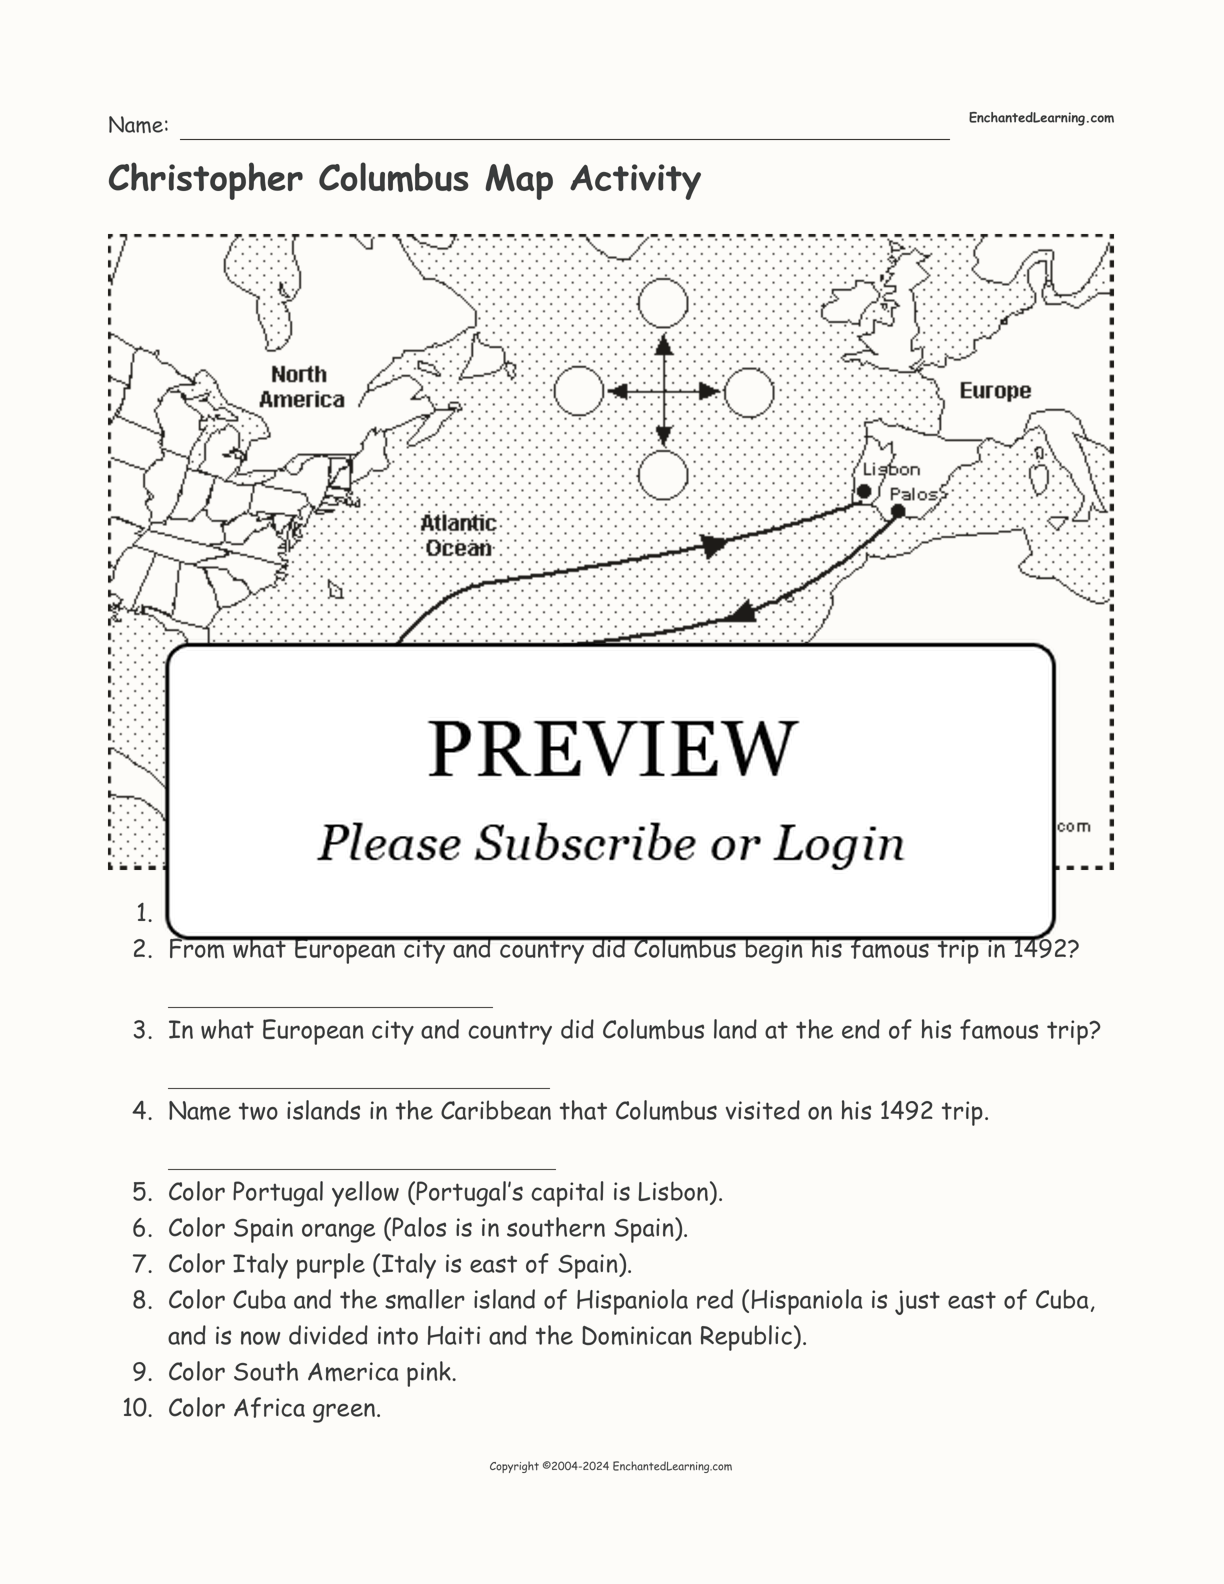 Christopher Columbus Map Activity interactive worksheet page 1